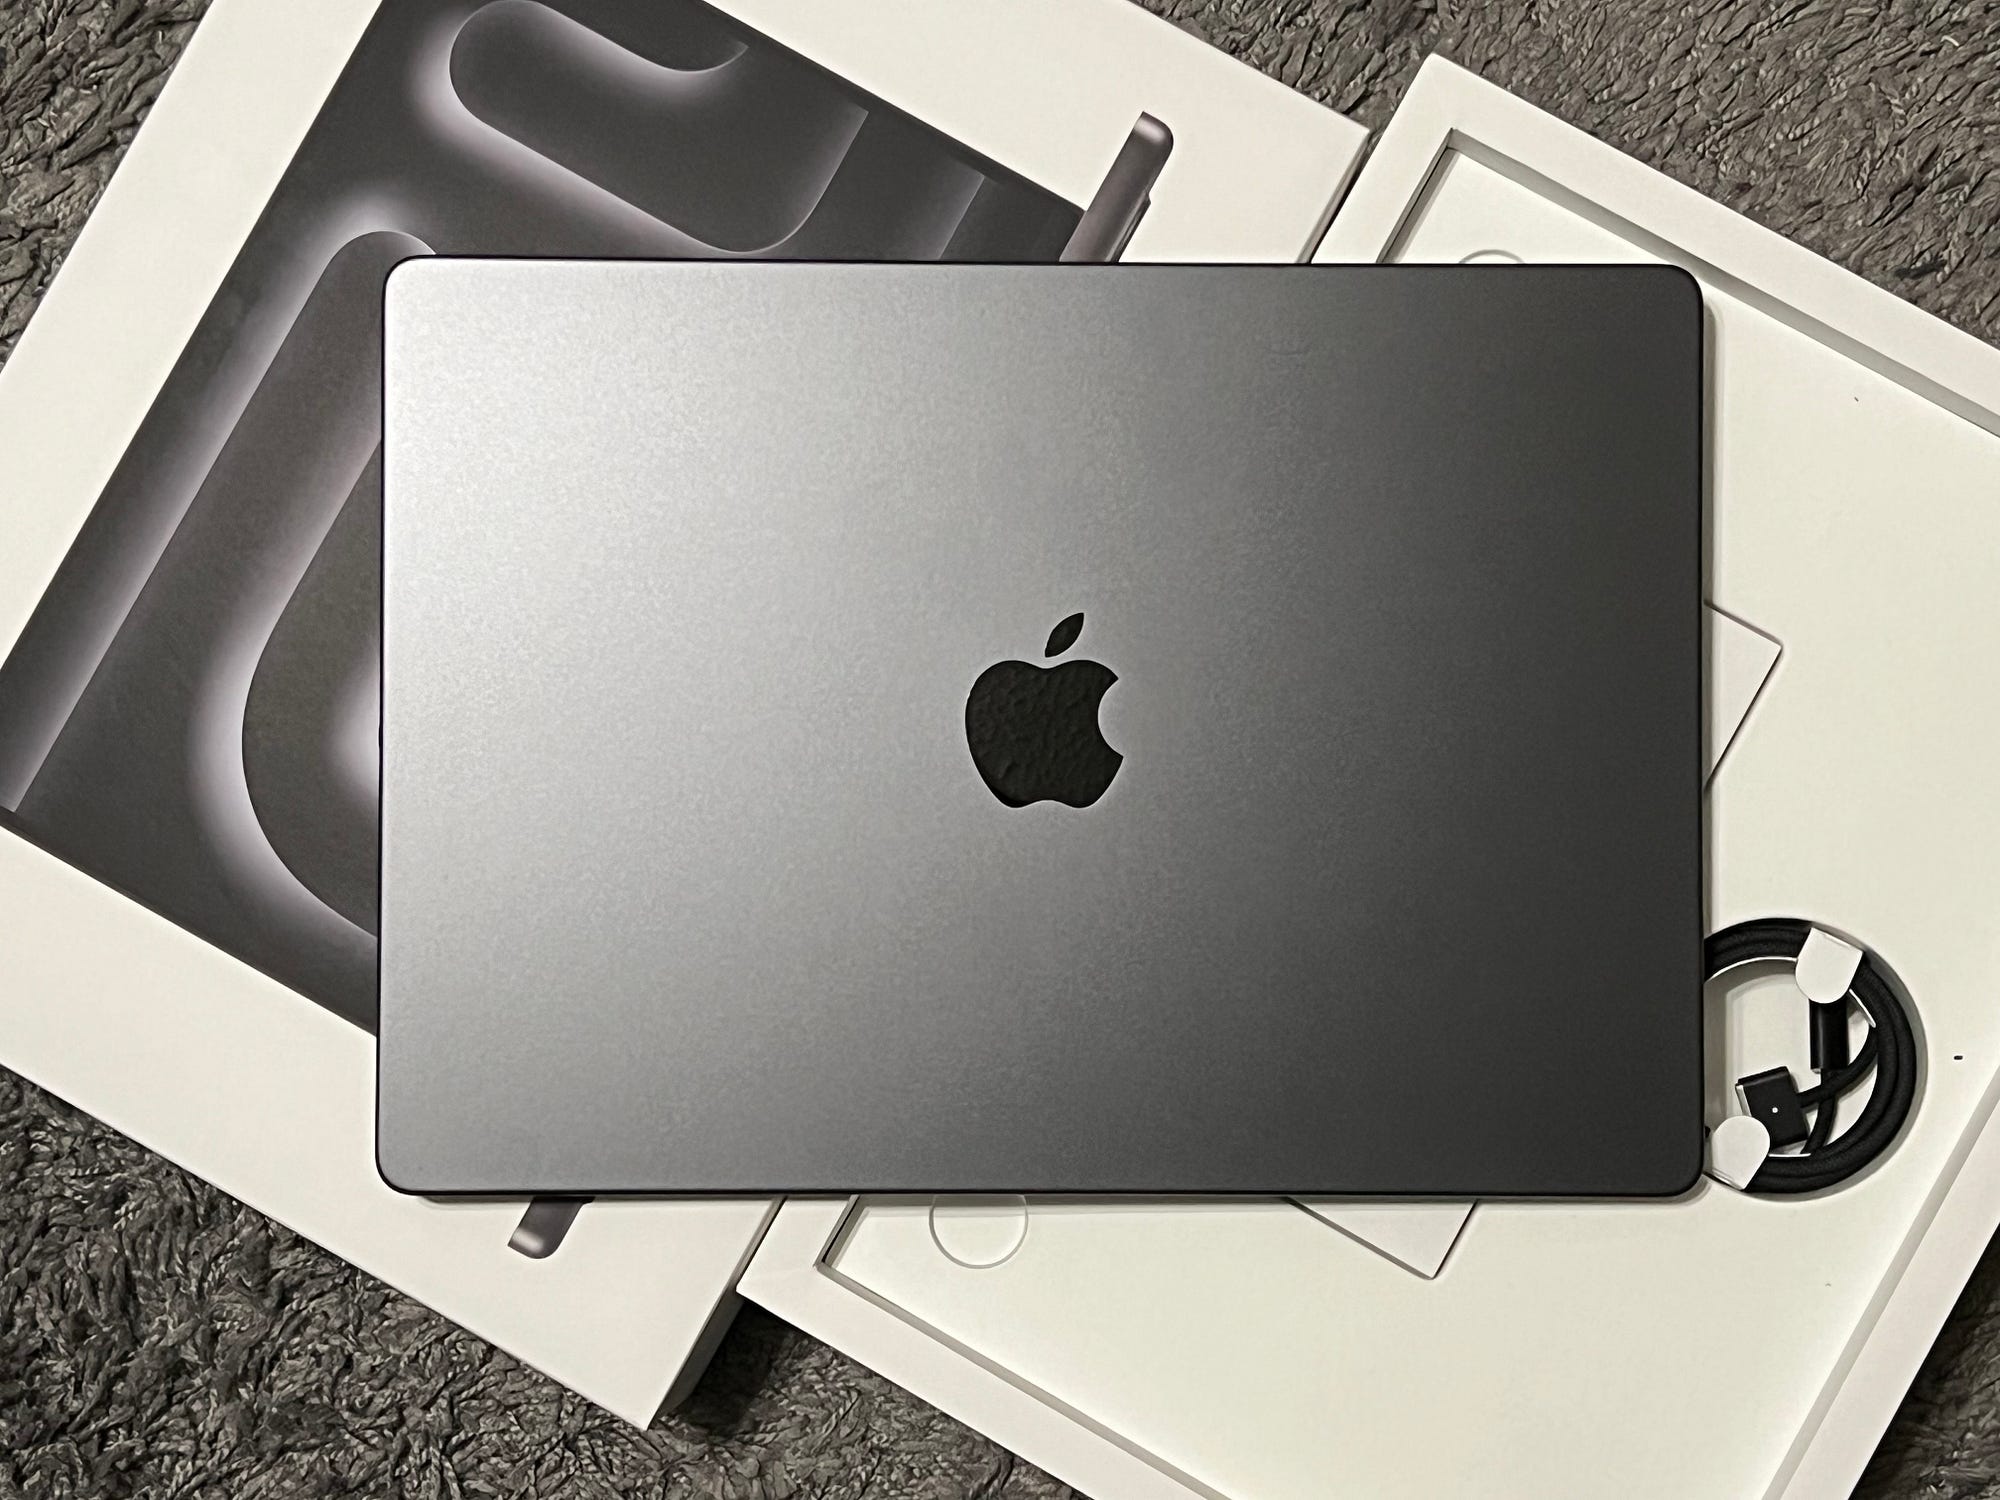 Apple 14-inch MacBook Pro: Apple M3 Max chip with 14 core CPU and 30 core  GPU, 1TB SSD - Space Black (Latest Model)